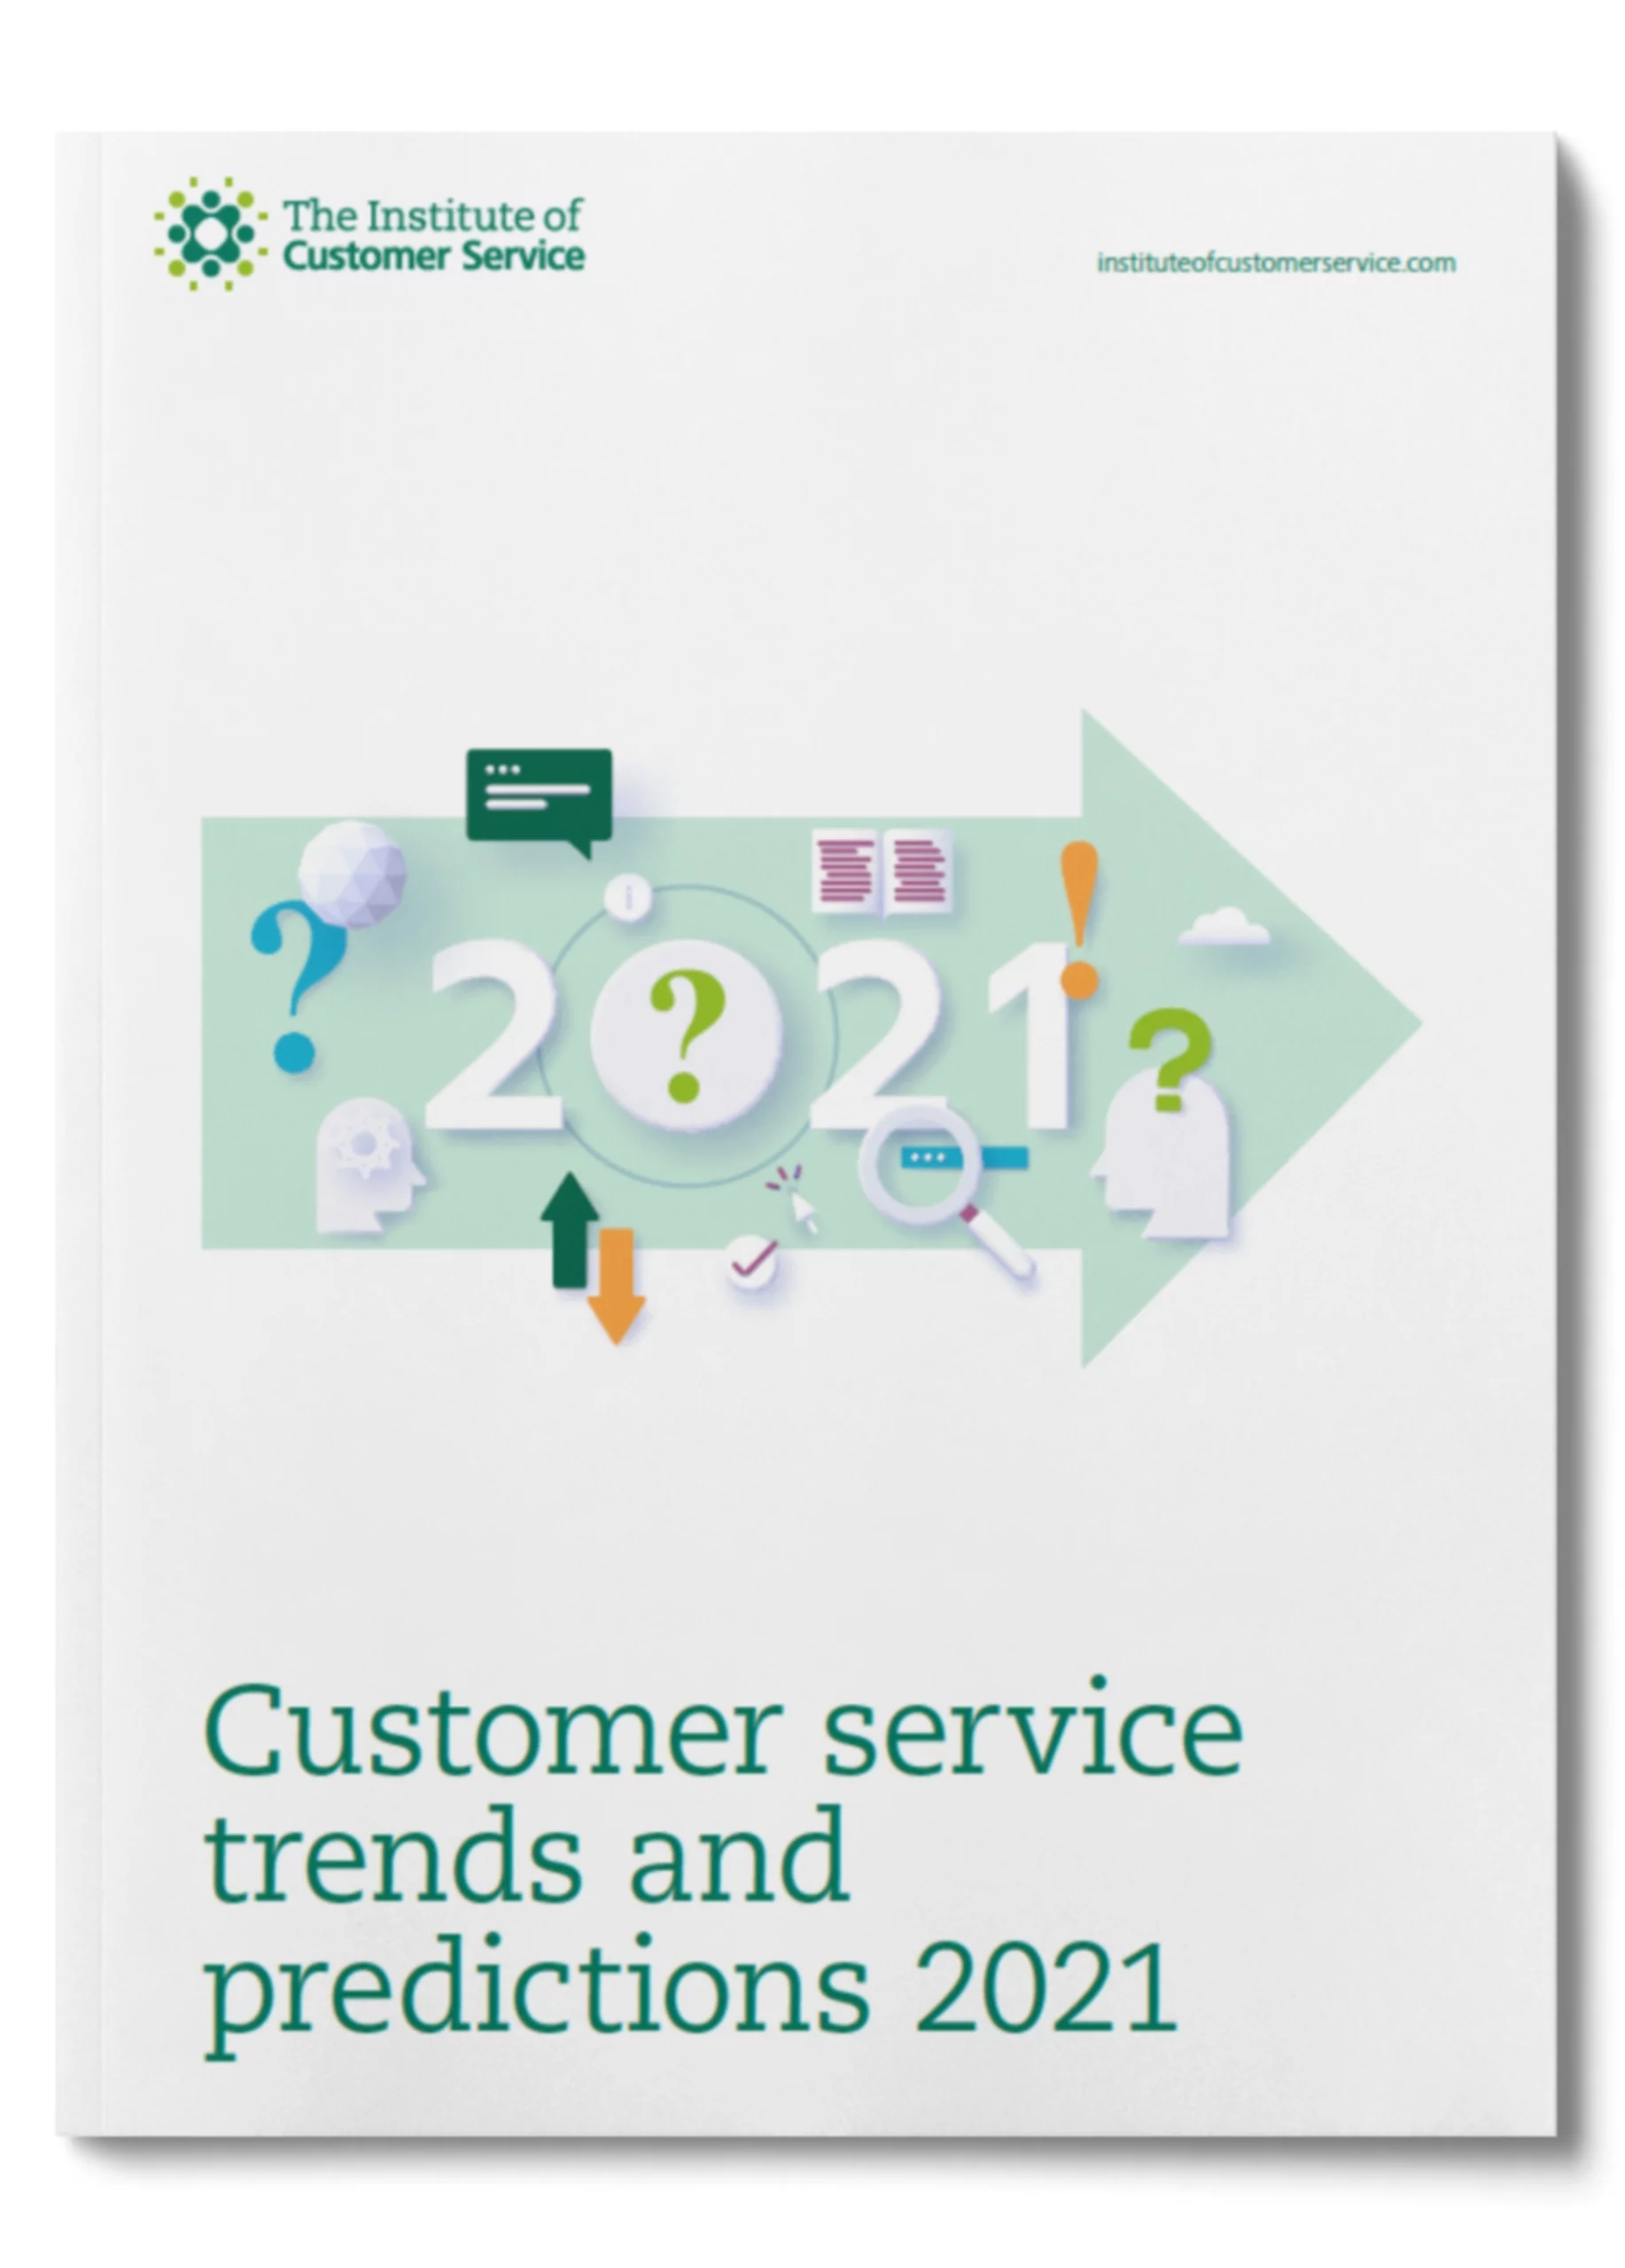 Customer service trends and predictions for 2021